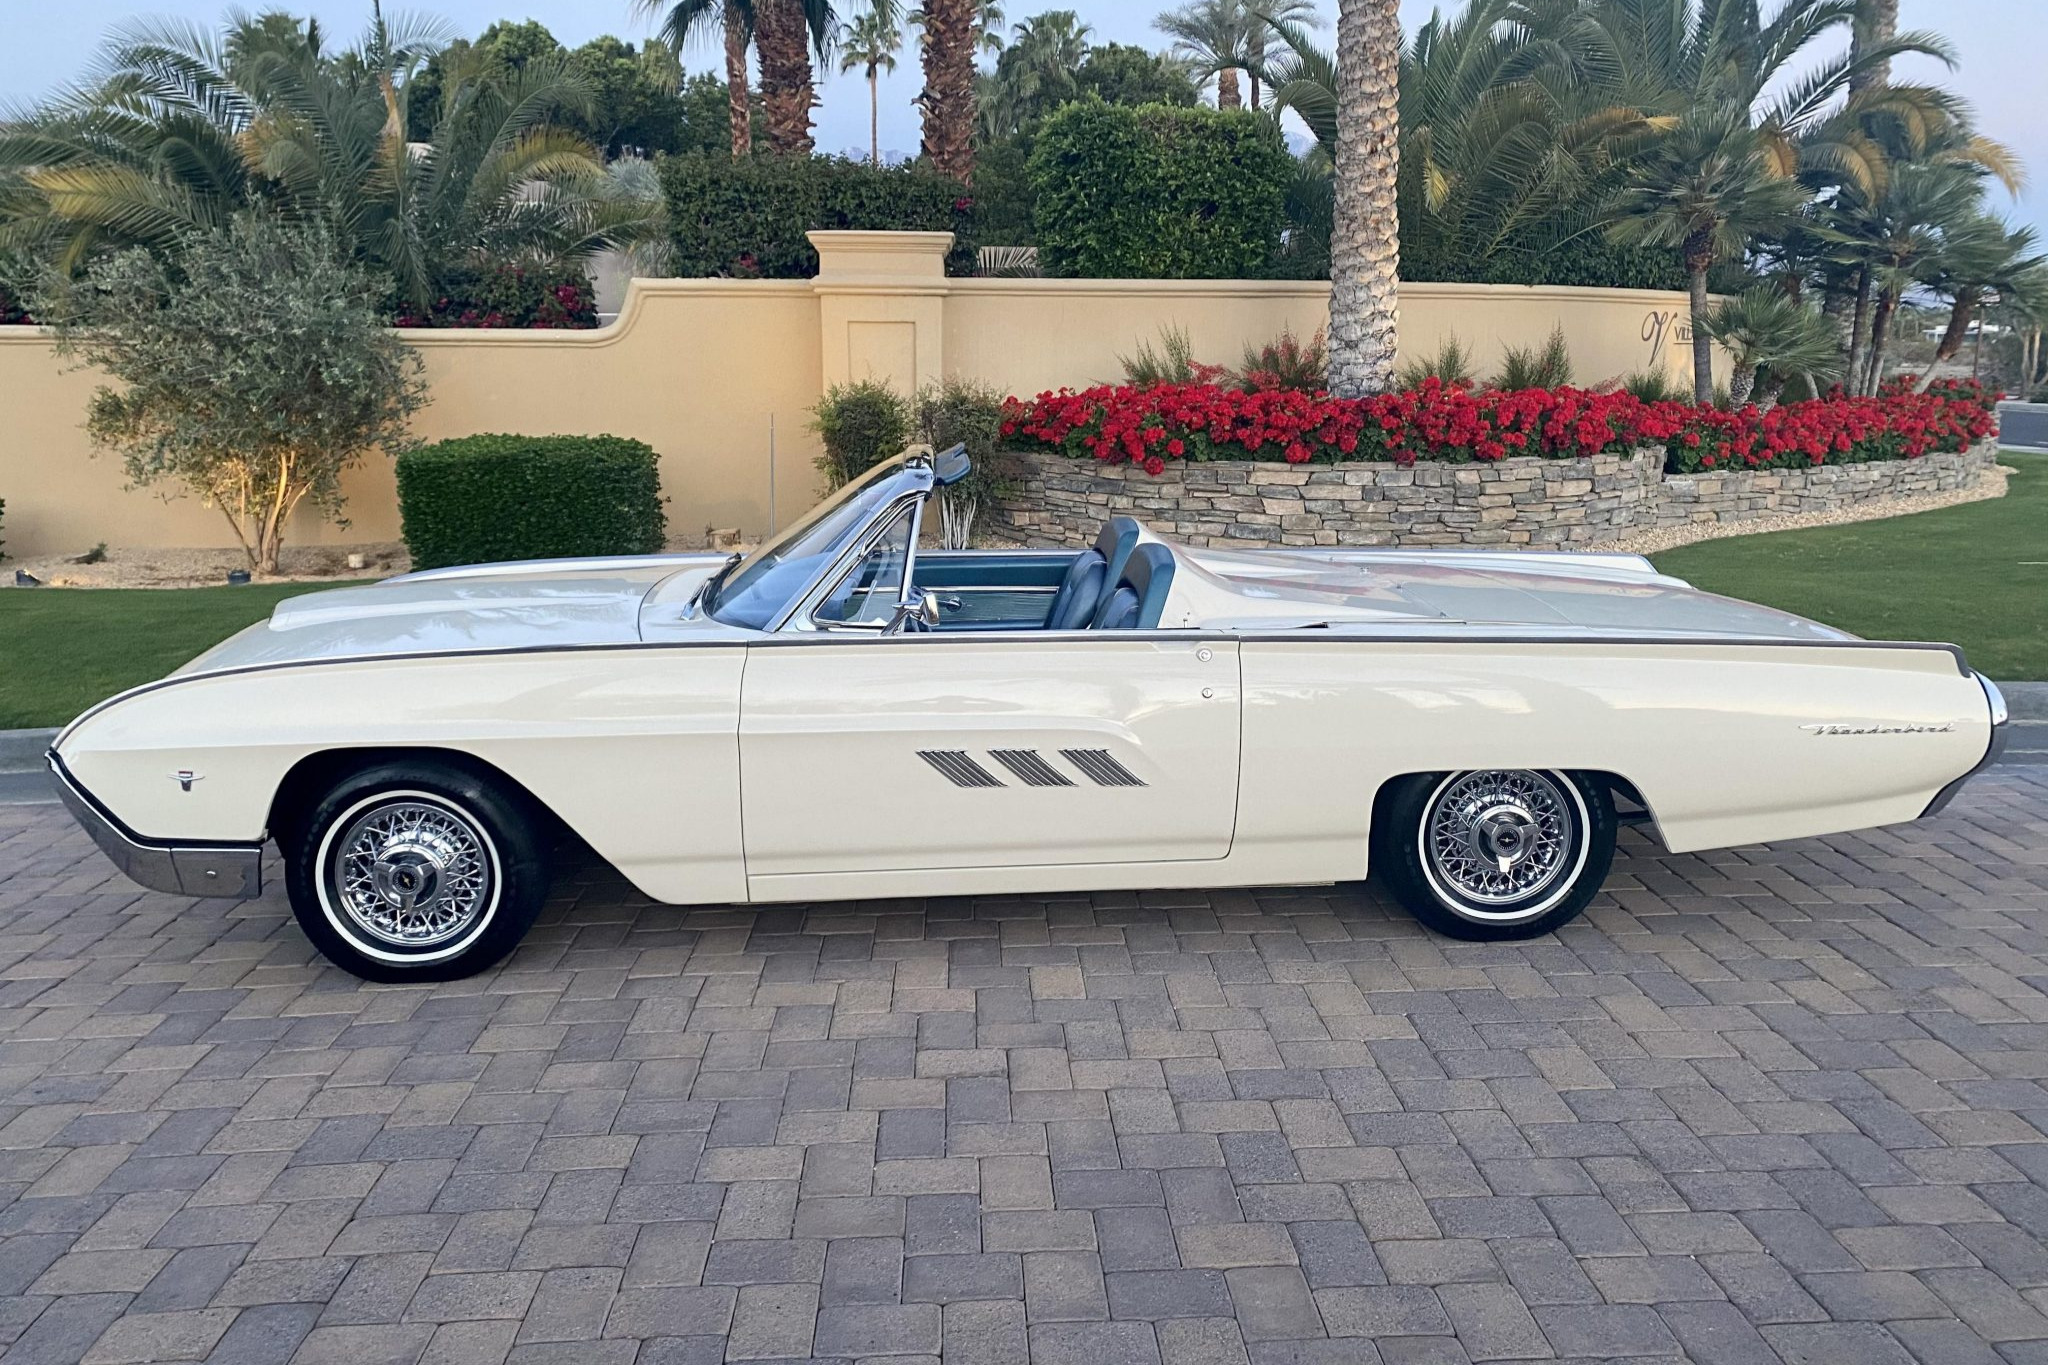 1963 Ford Thunderbird Sports Roadster with Kelsey-Hayes wire wheels.